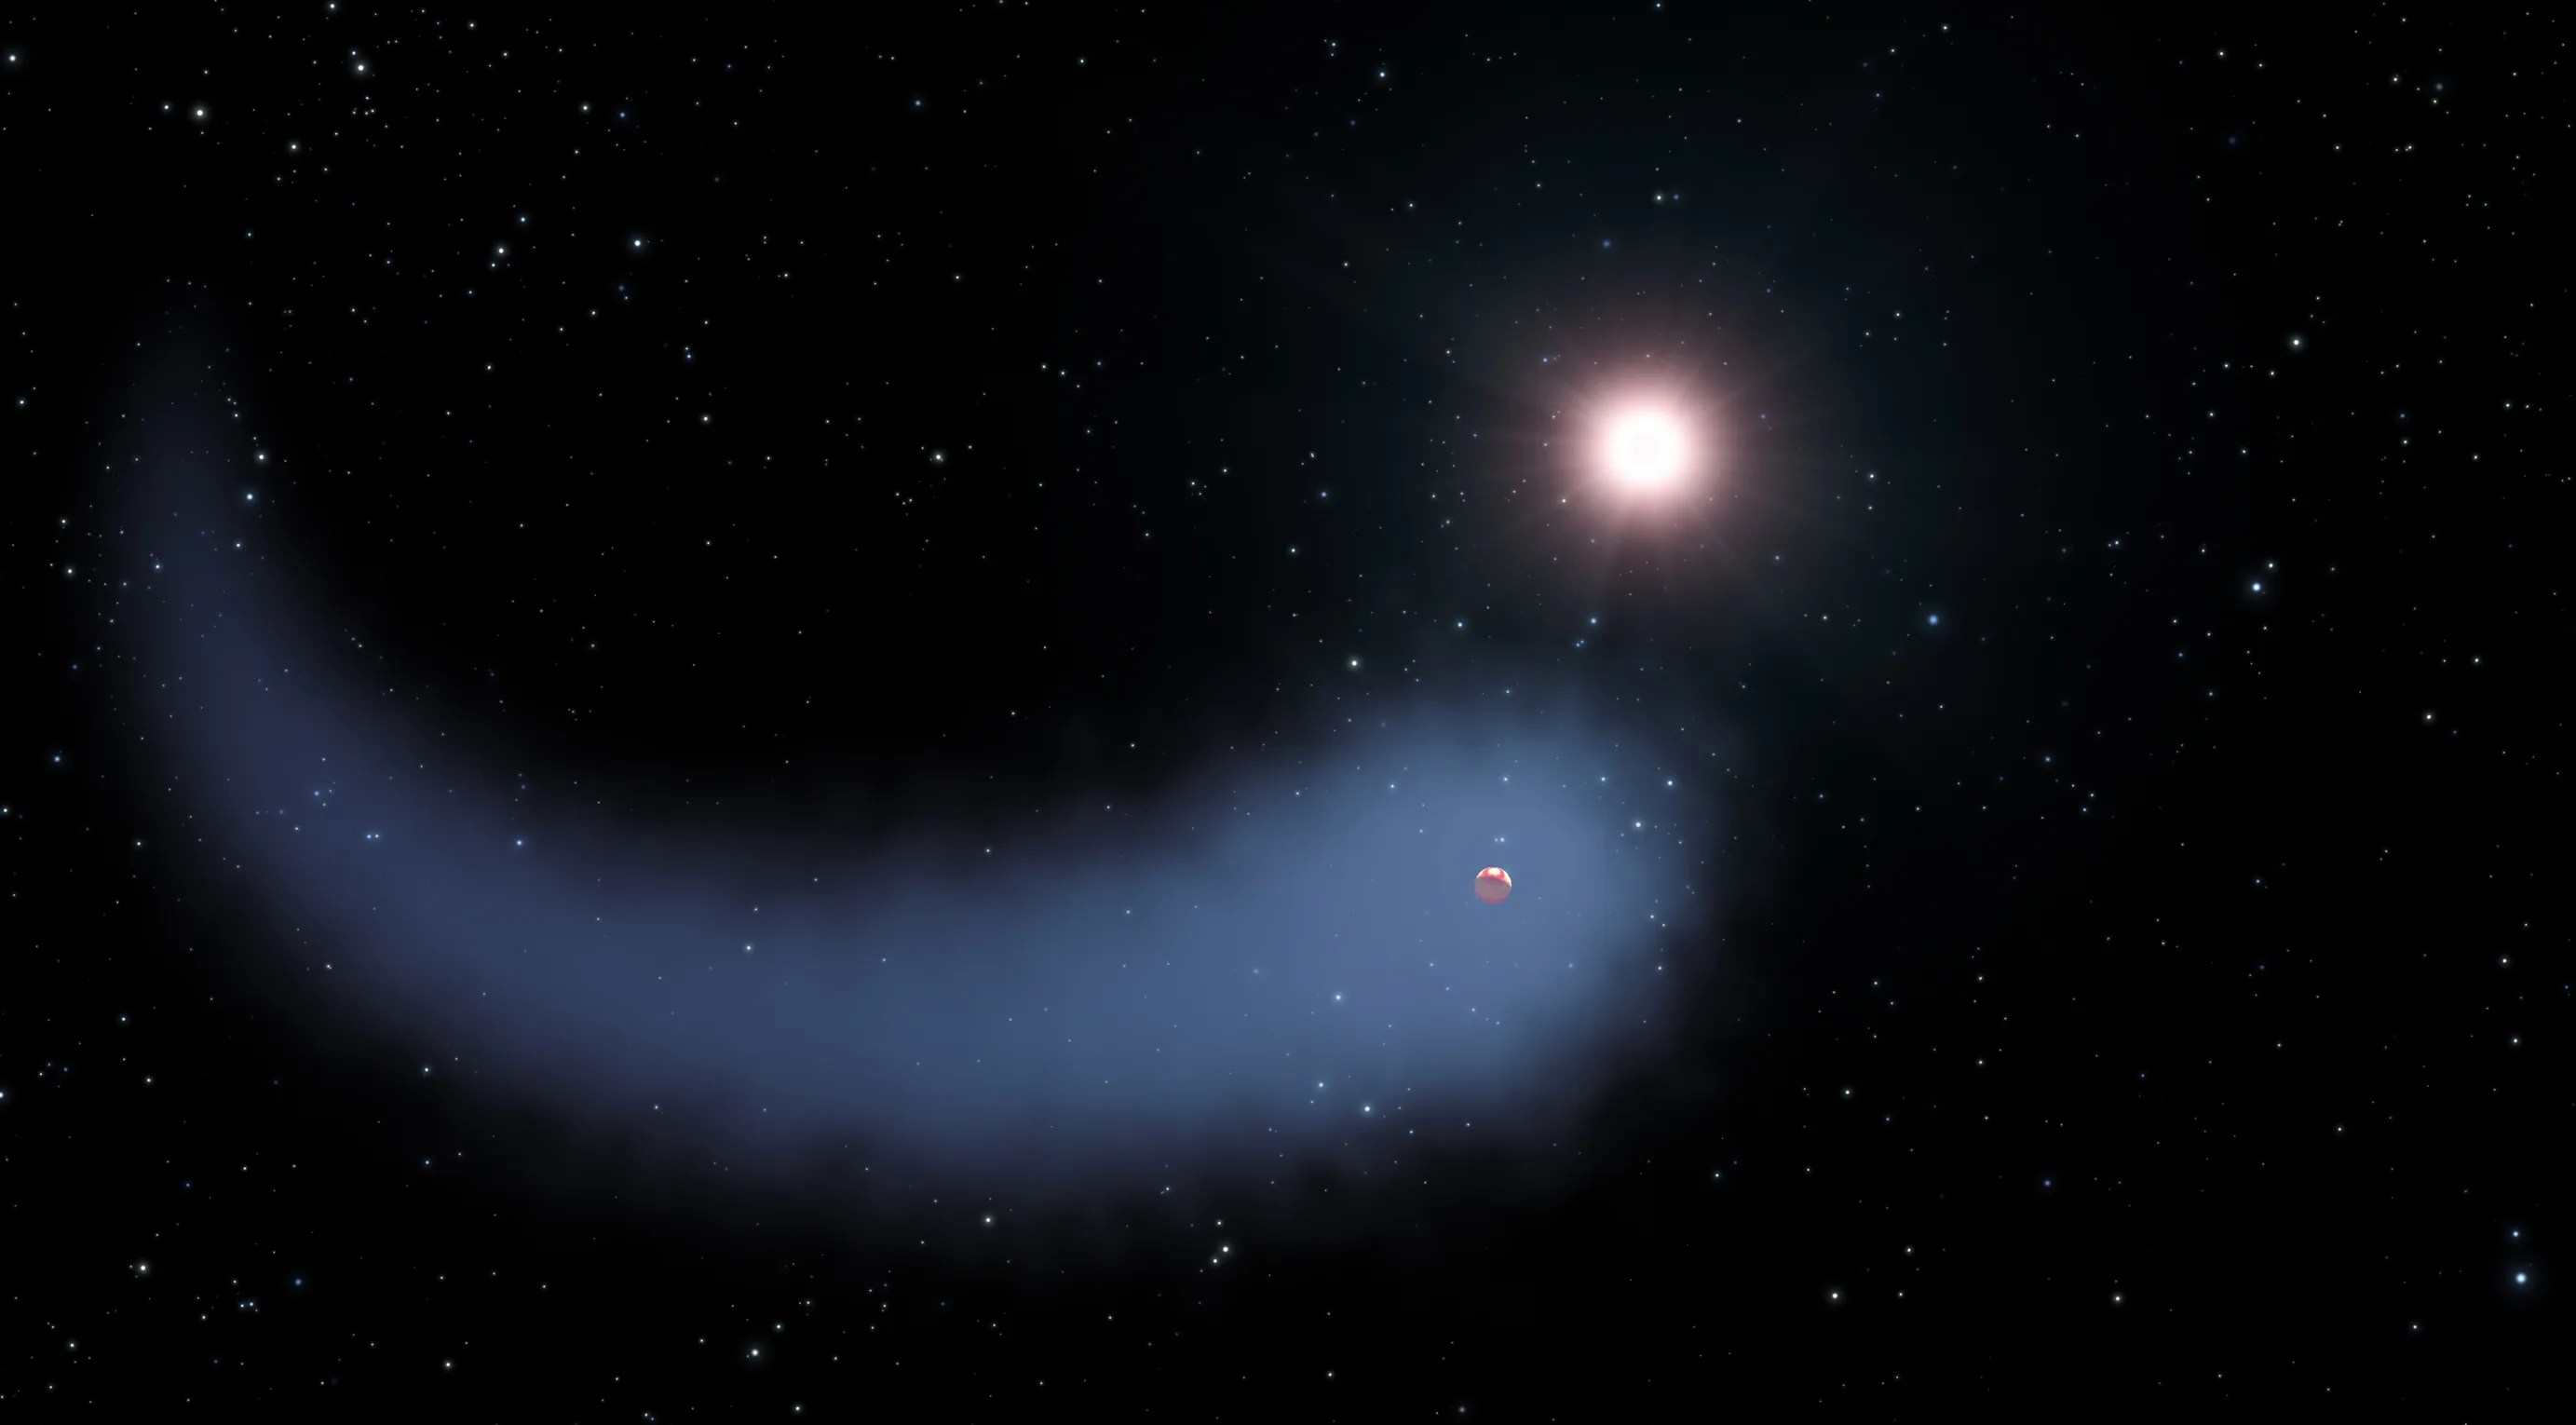 planet sized comet orbiting a small star